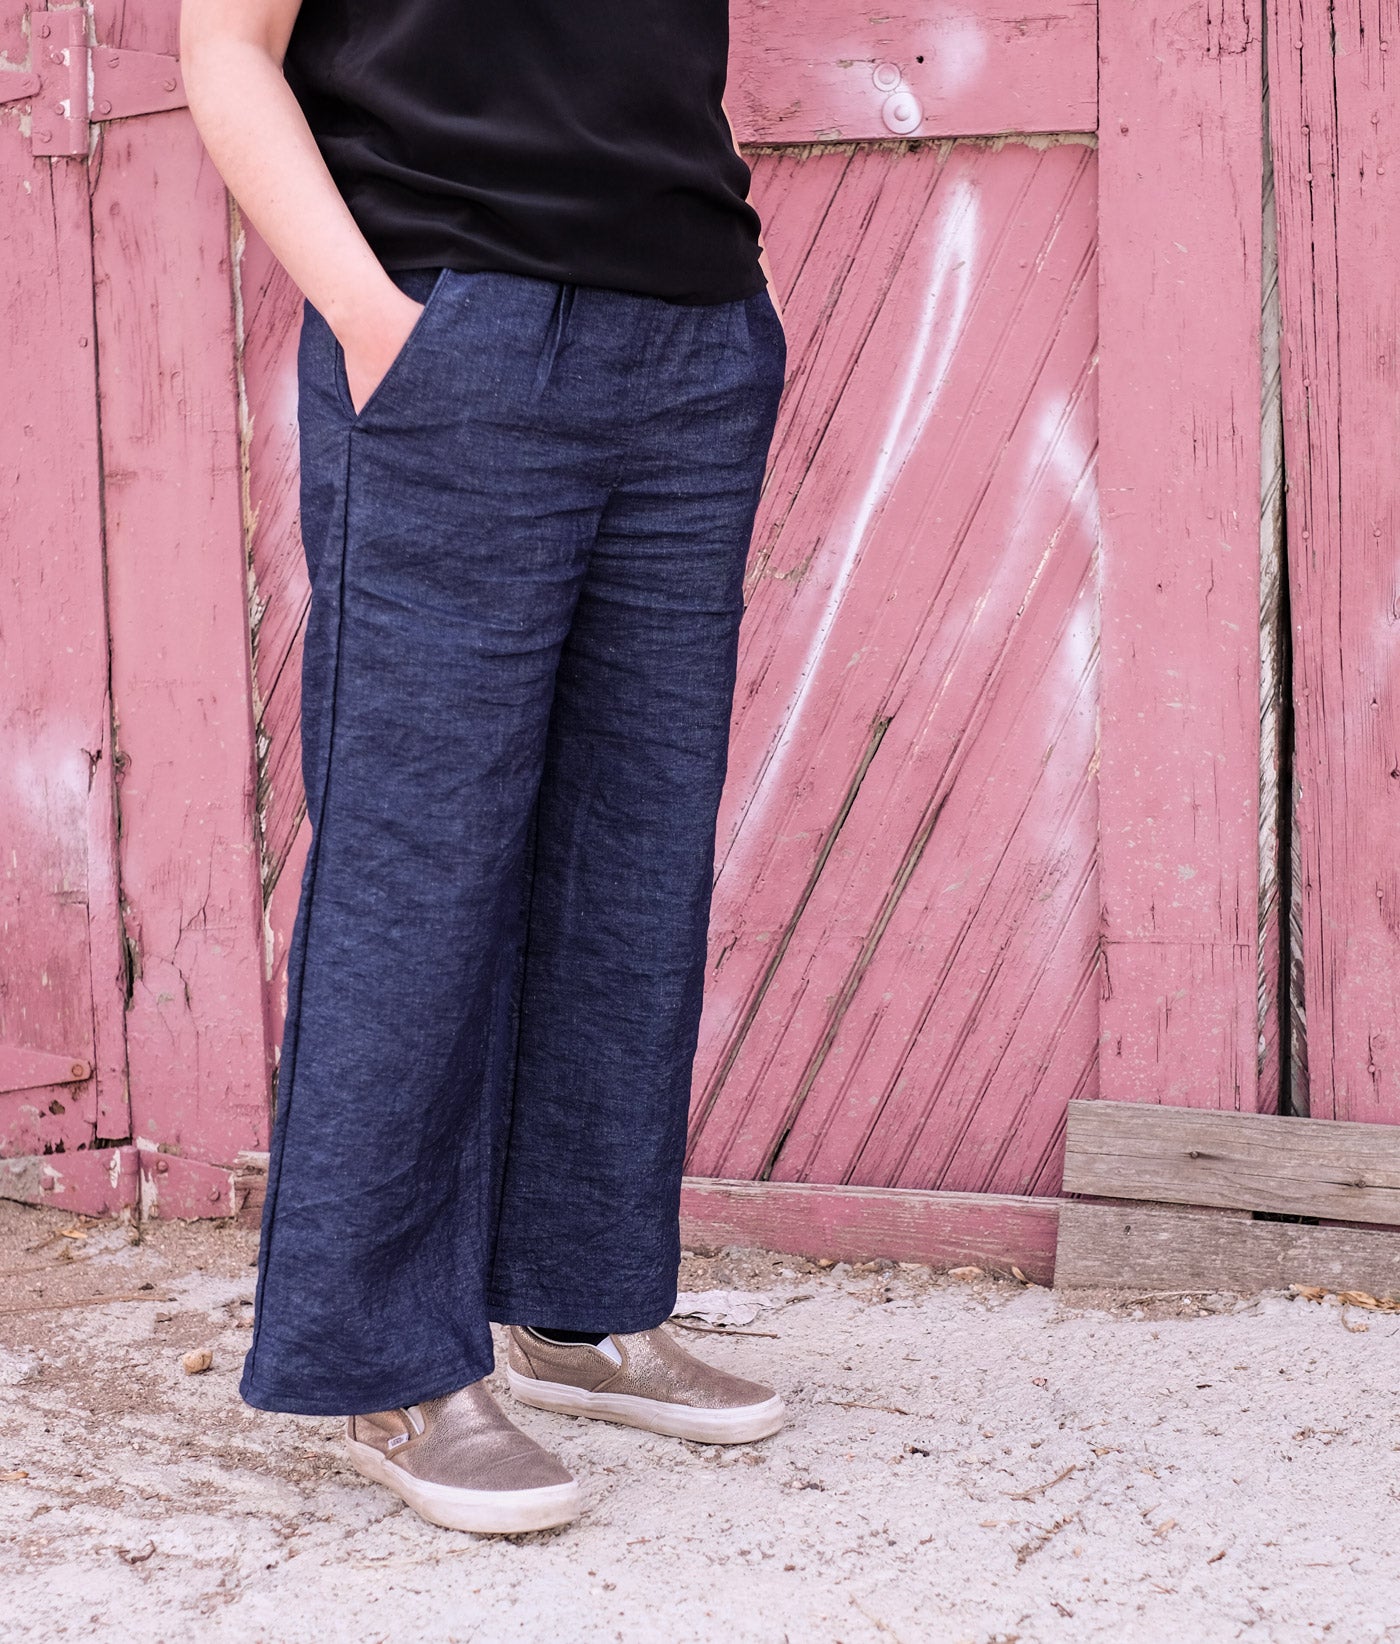 close up of Lucy's indigo linen trousers, her hands in the pockets